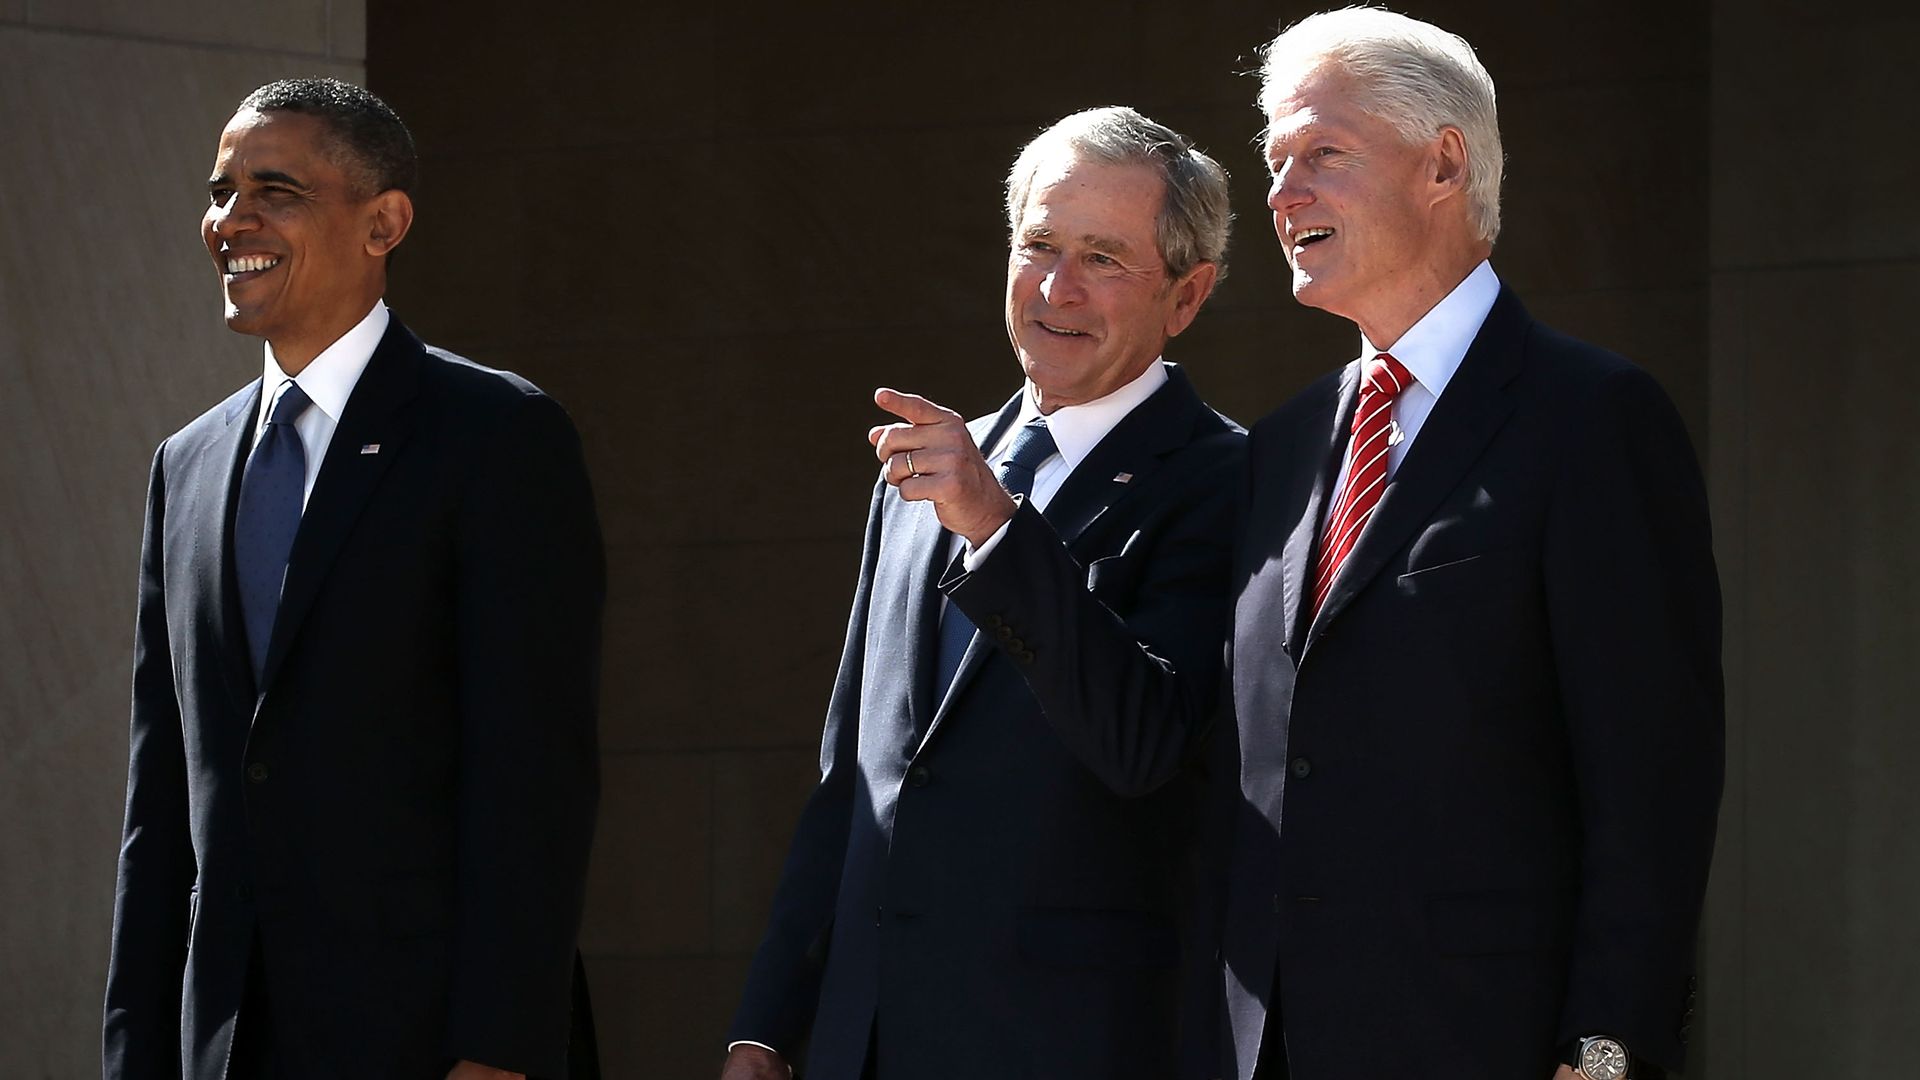 Former Presidents Barack Obama, George W. Bush and Bill Clinton attending the opening ceremony of the George W. Bush Presidential Center in April 2013 in Dallas, Texas.